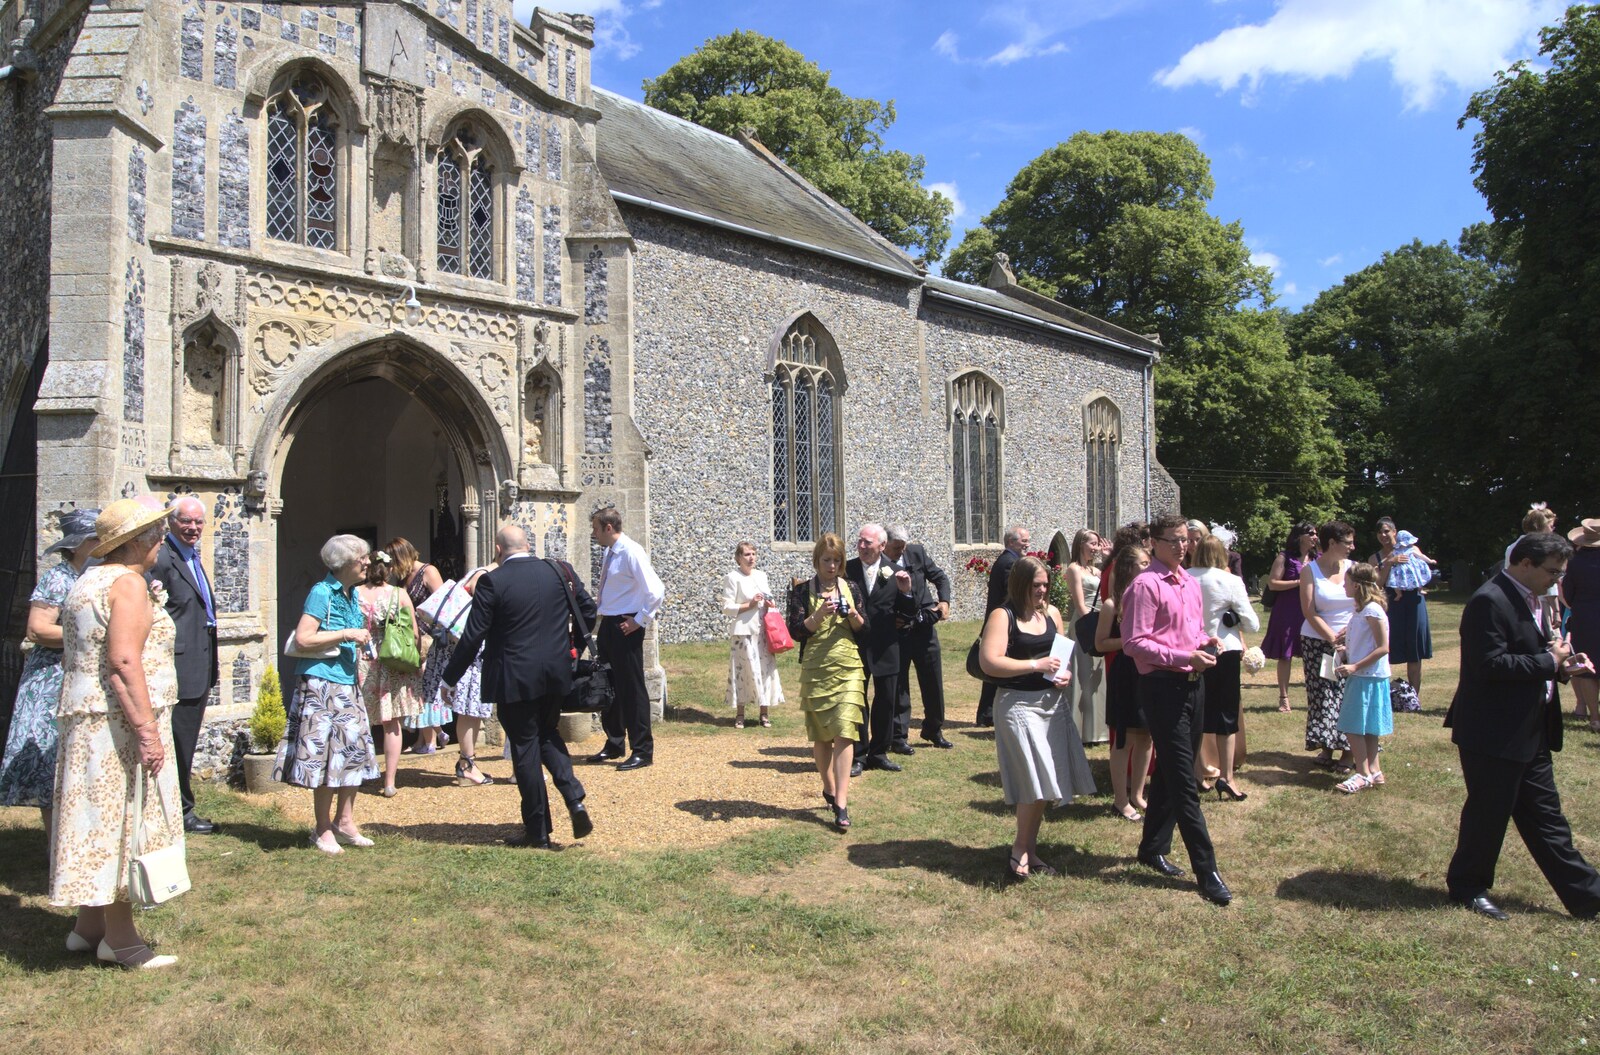 Crowds outside the church from Clive and Suzanne's Wedding, Oakley and Brome, Suffolk - 10th July 2010